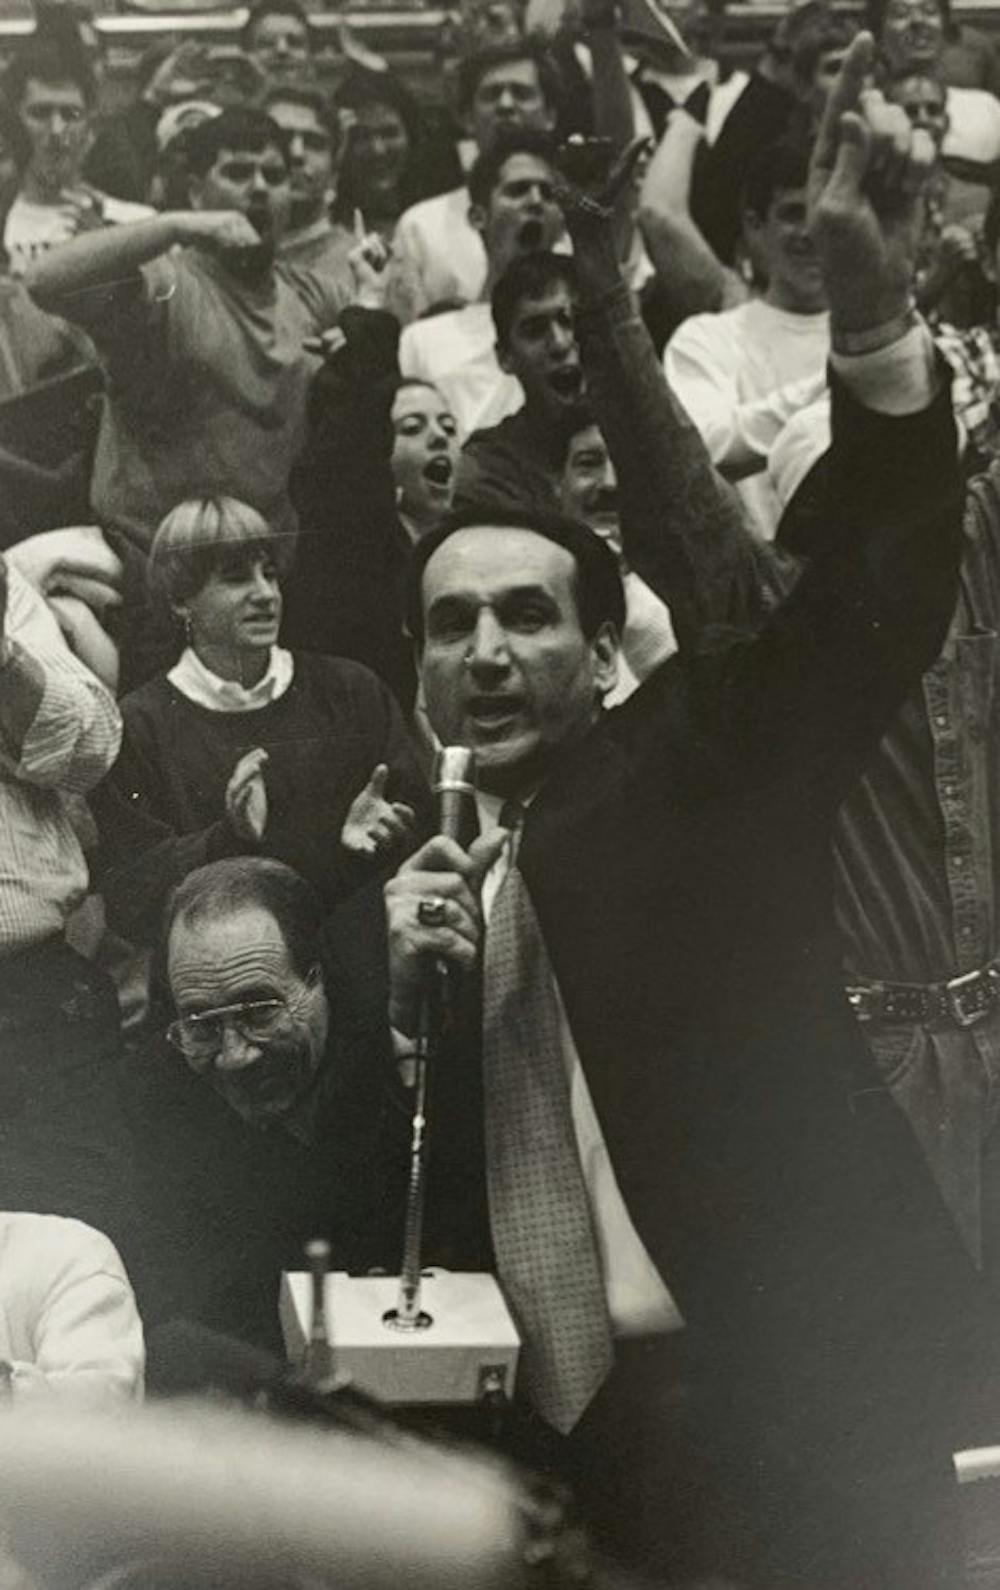 Krzyzewski has been the Blue Devil head coach for 42 years, but what defined the 75-year-old before 1980?